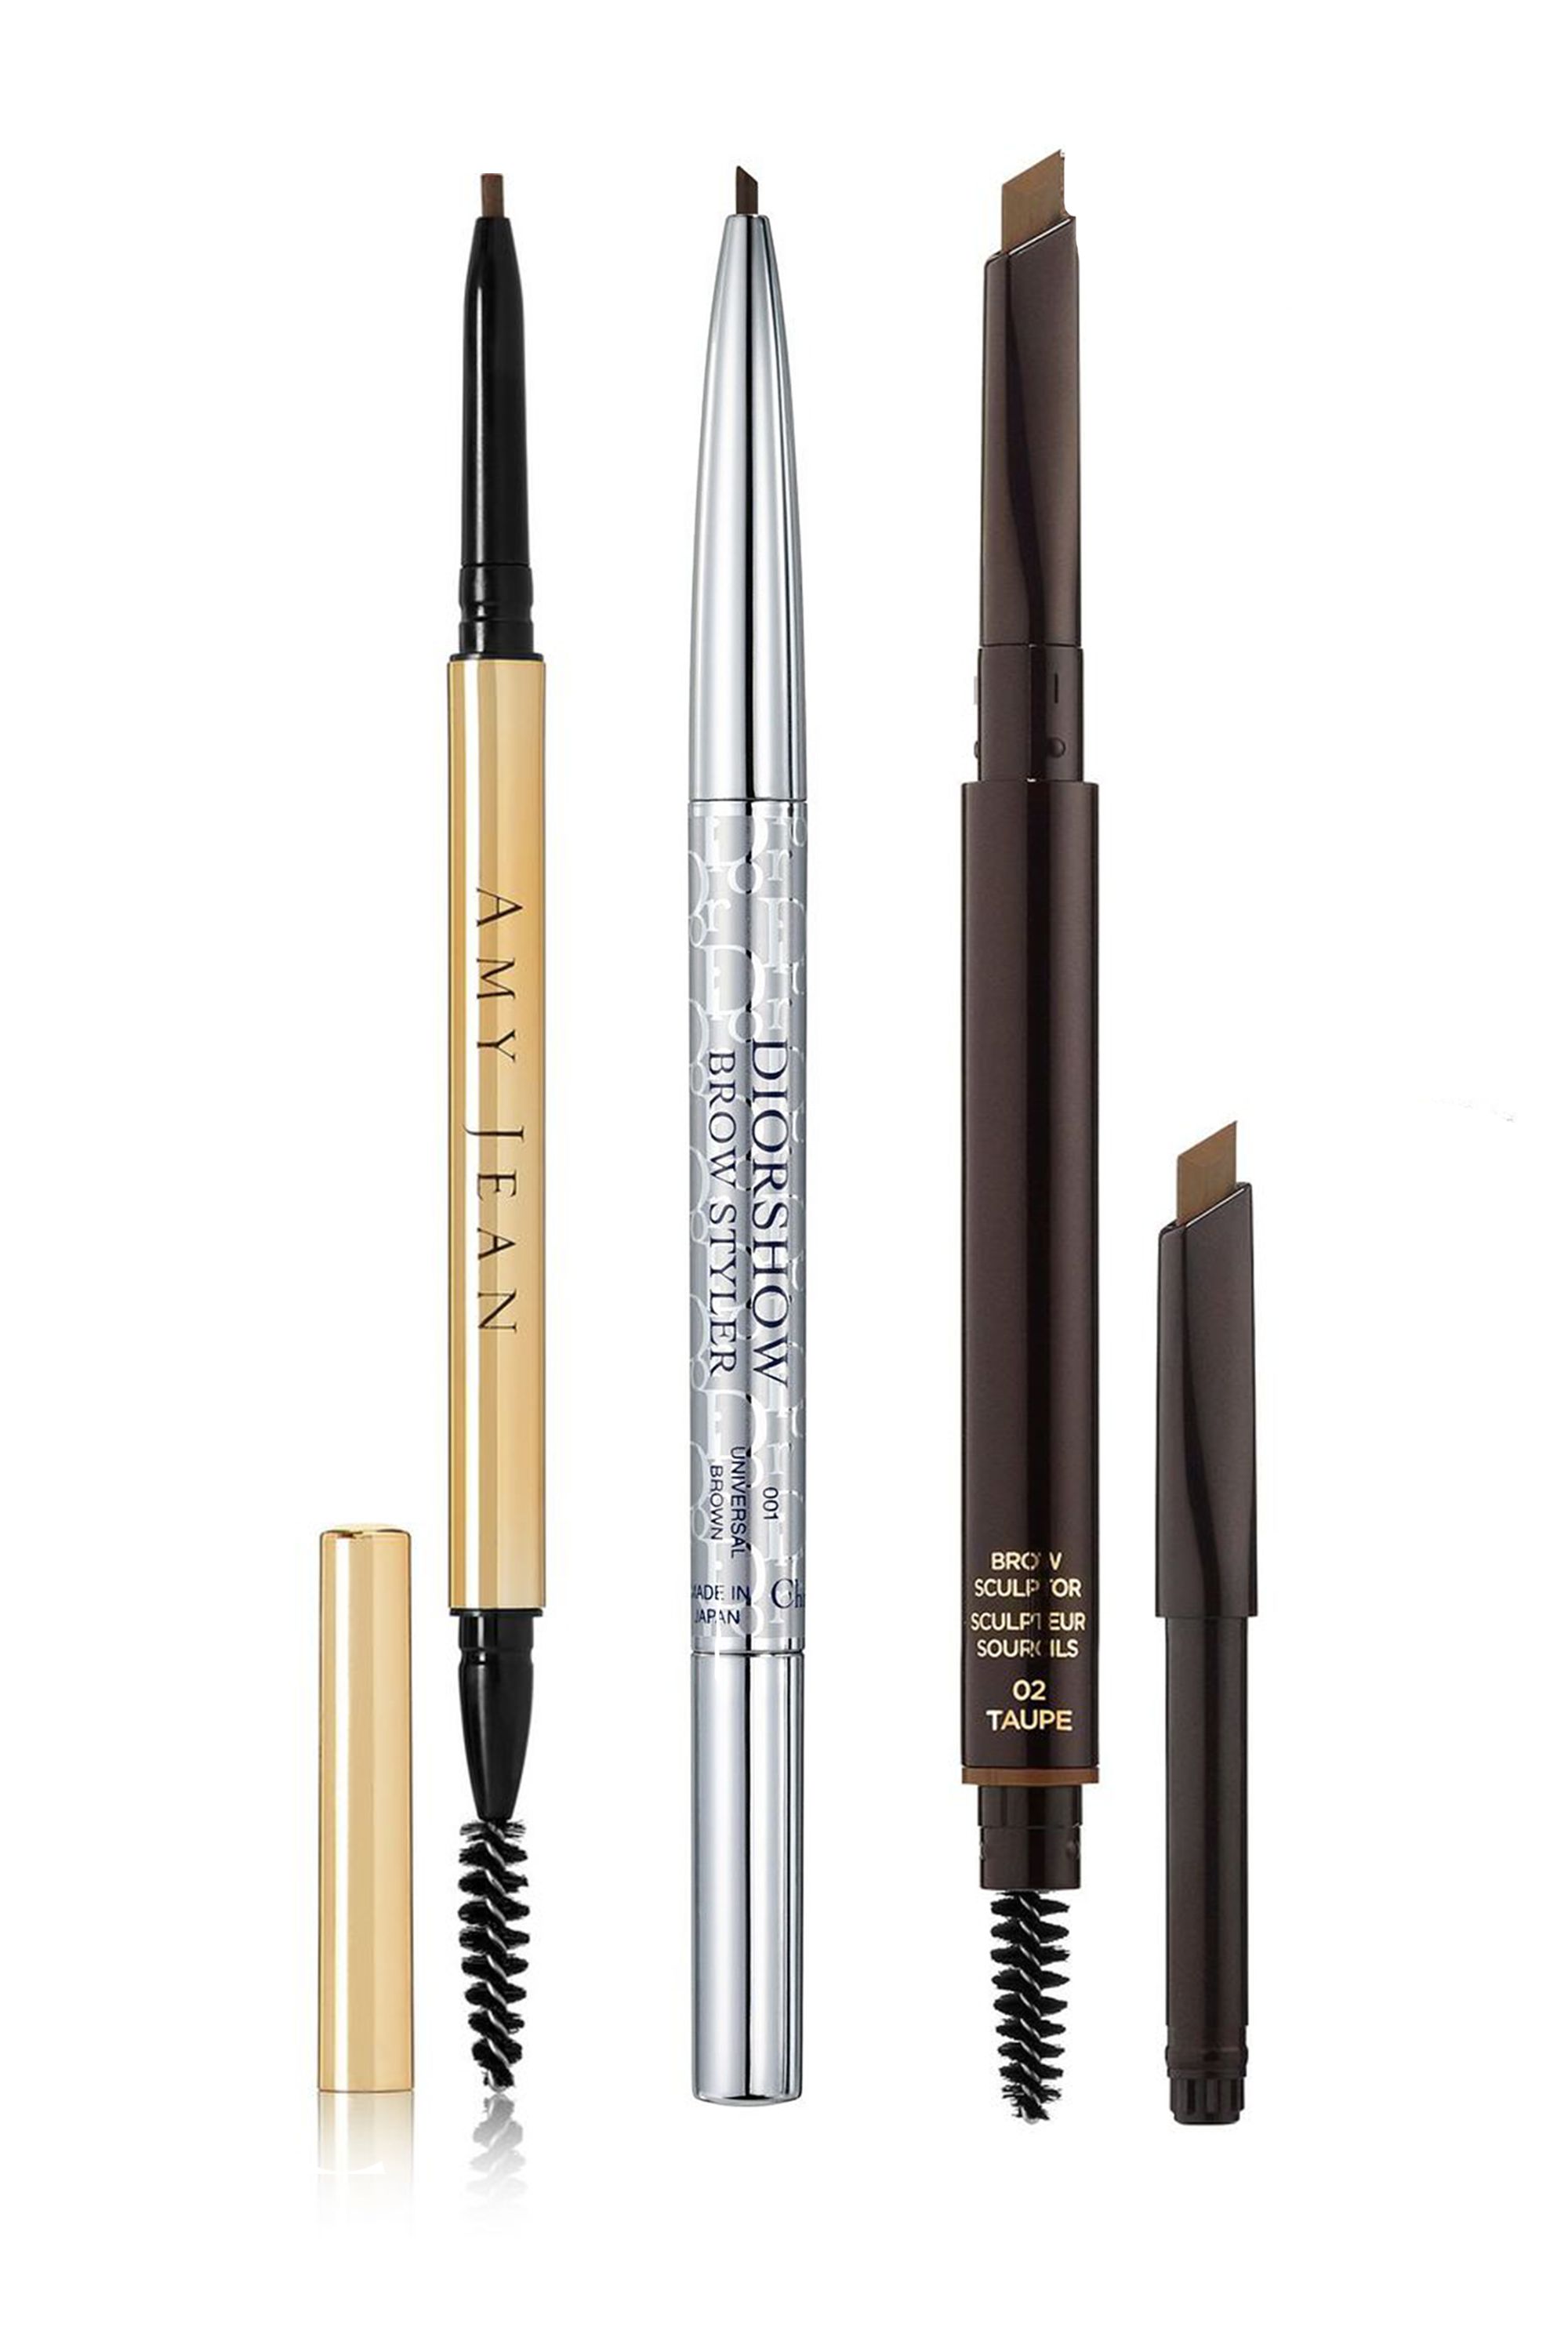 Best Eyebrow Makeup Products - 32 